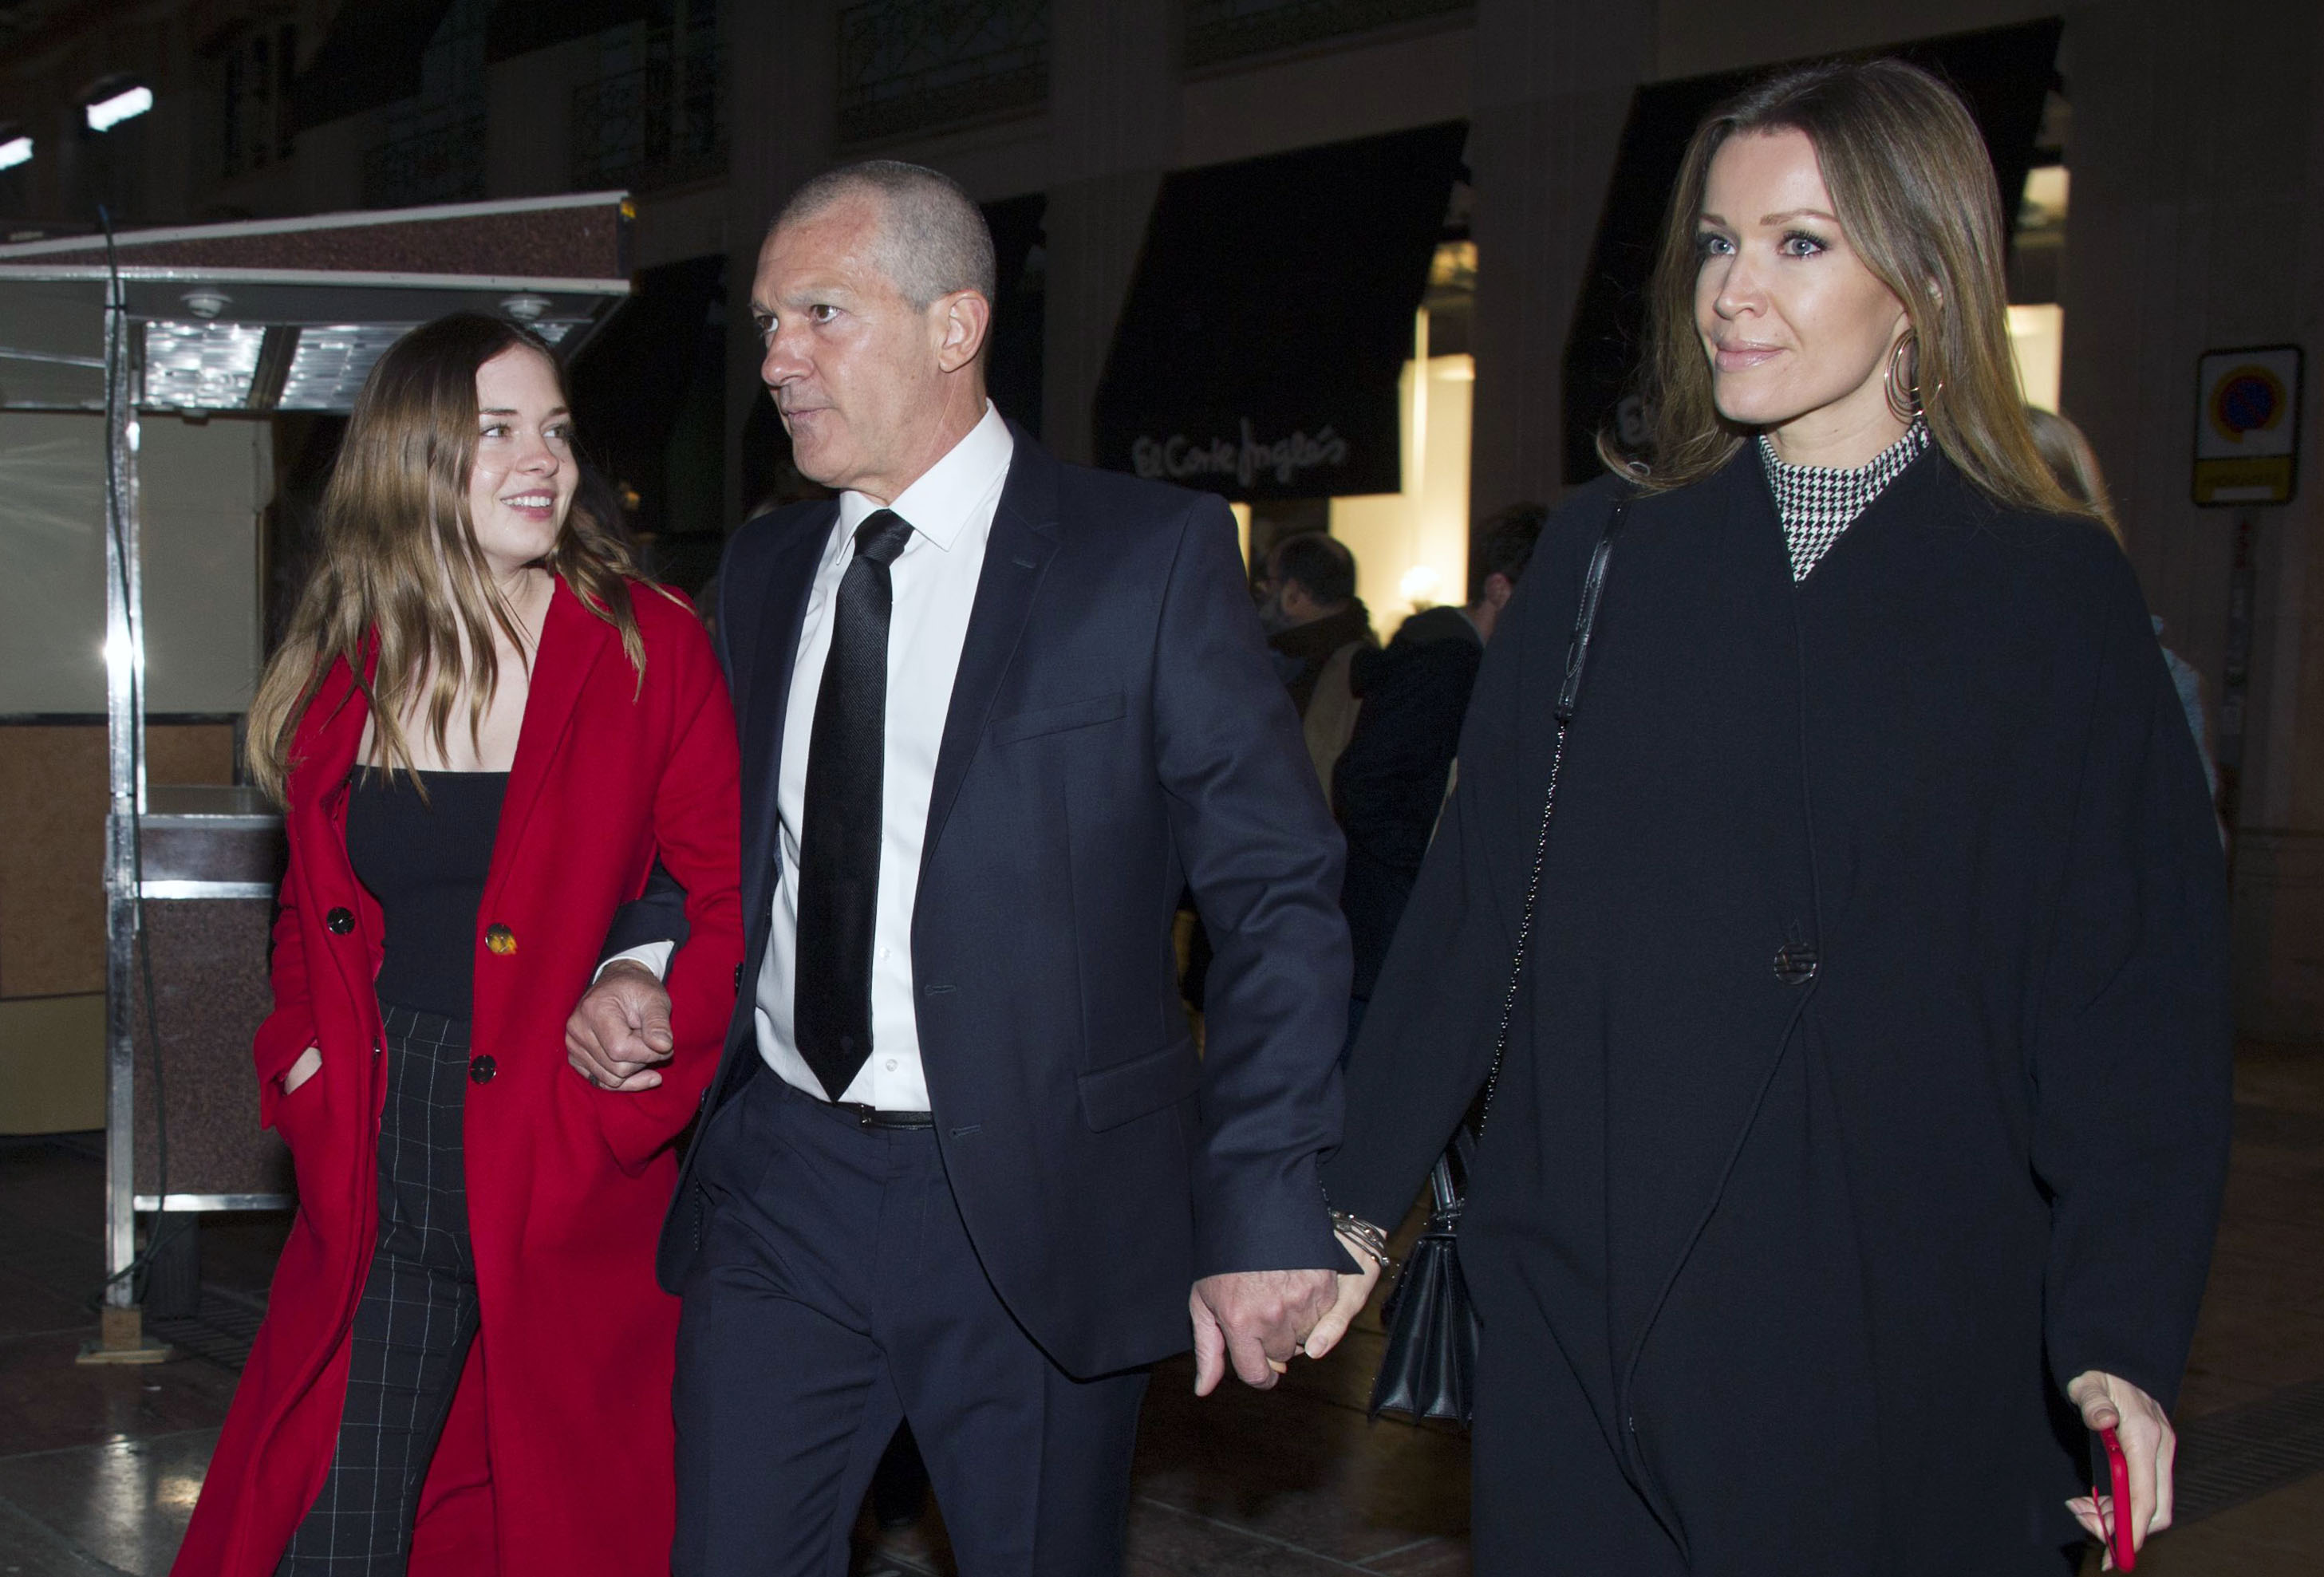 Antonio Banderas, Nicole Kimpel, and Stella in Spain in 2018 | Source: Getty Images